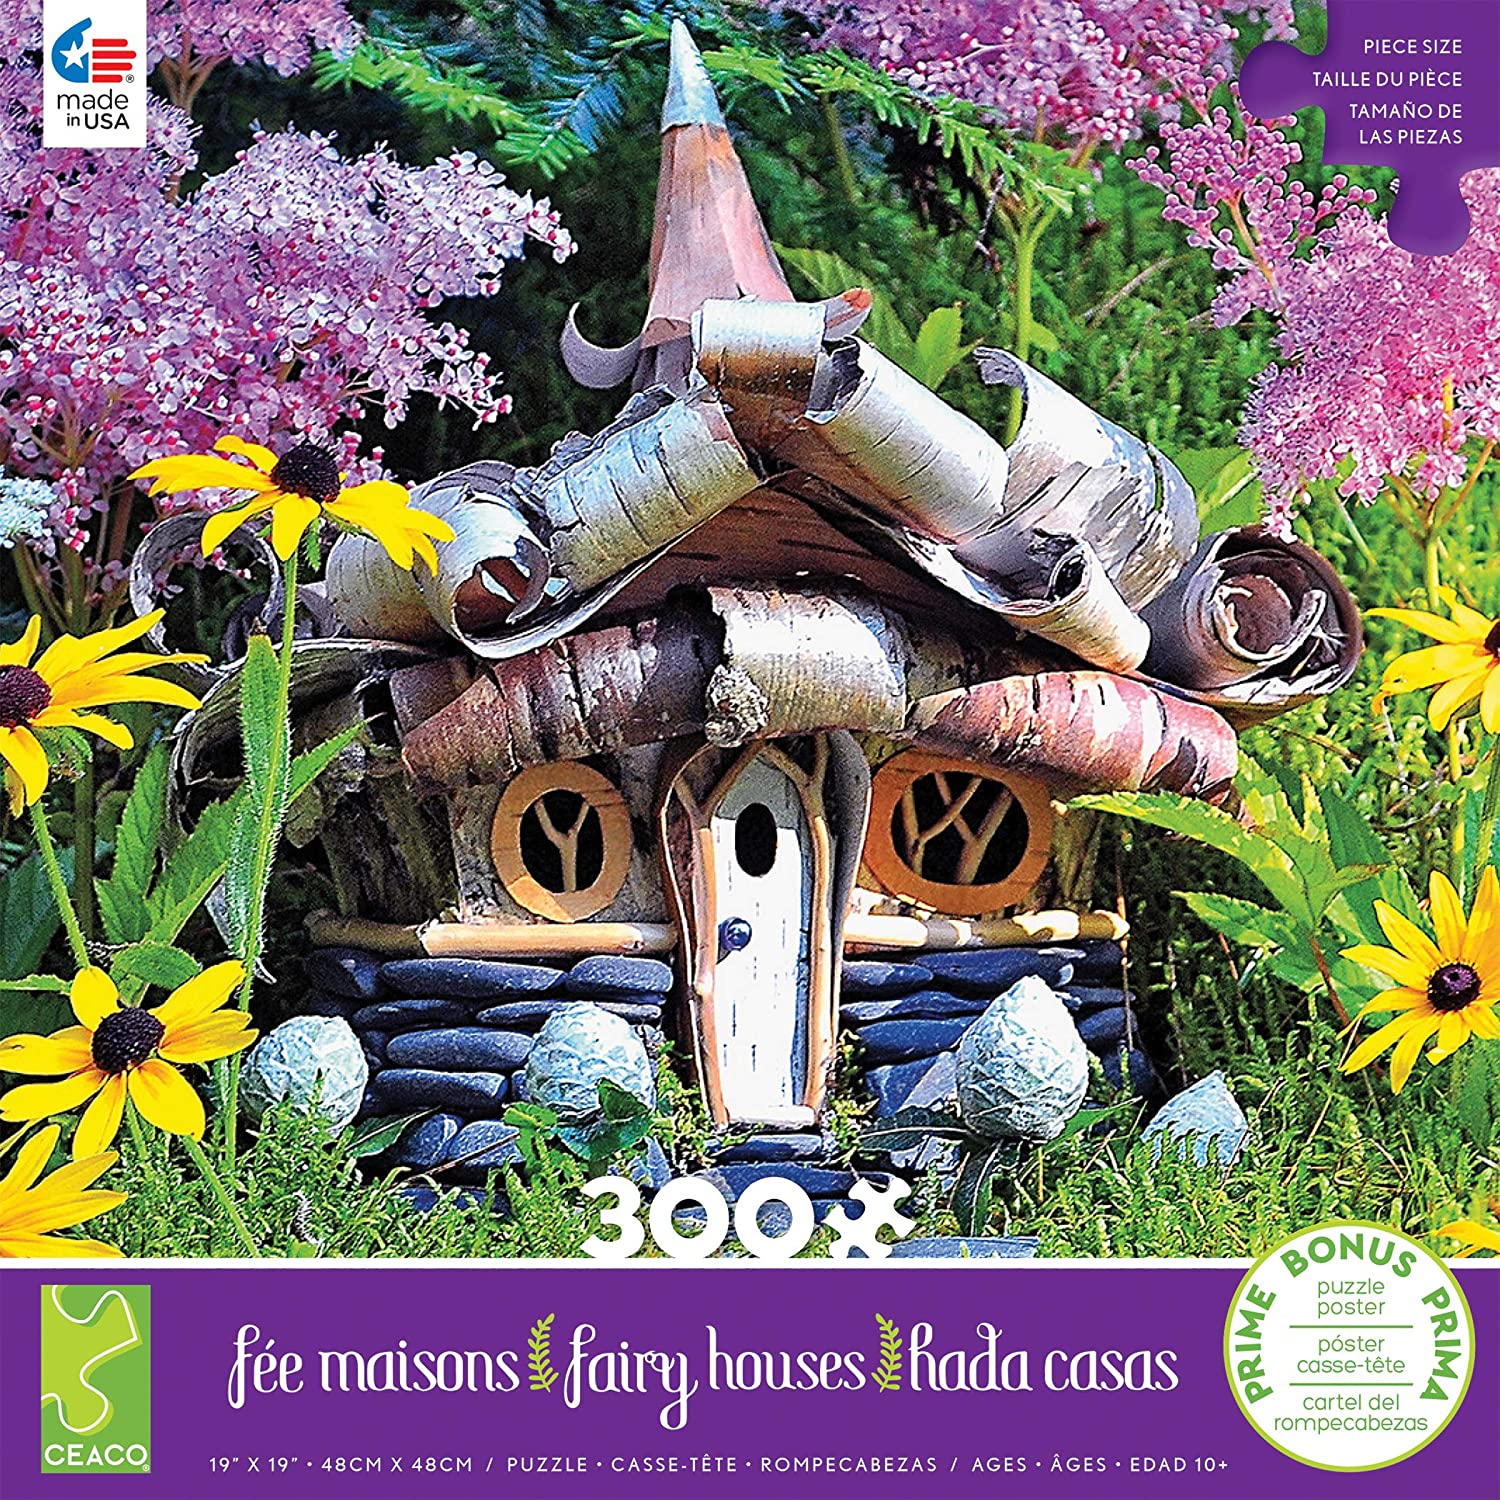 Fairy Houses (assorted 300 pc puzzles)